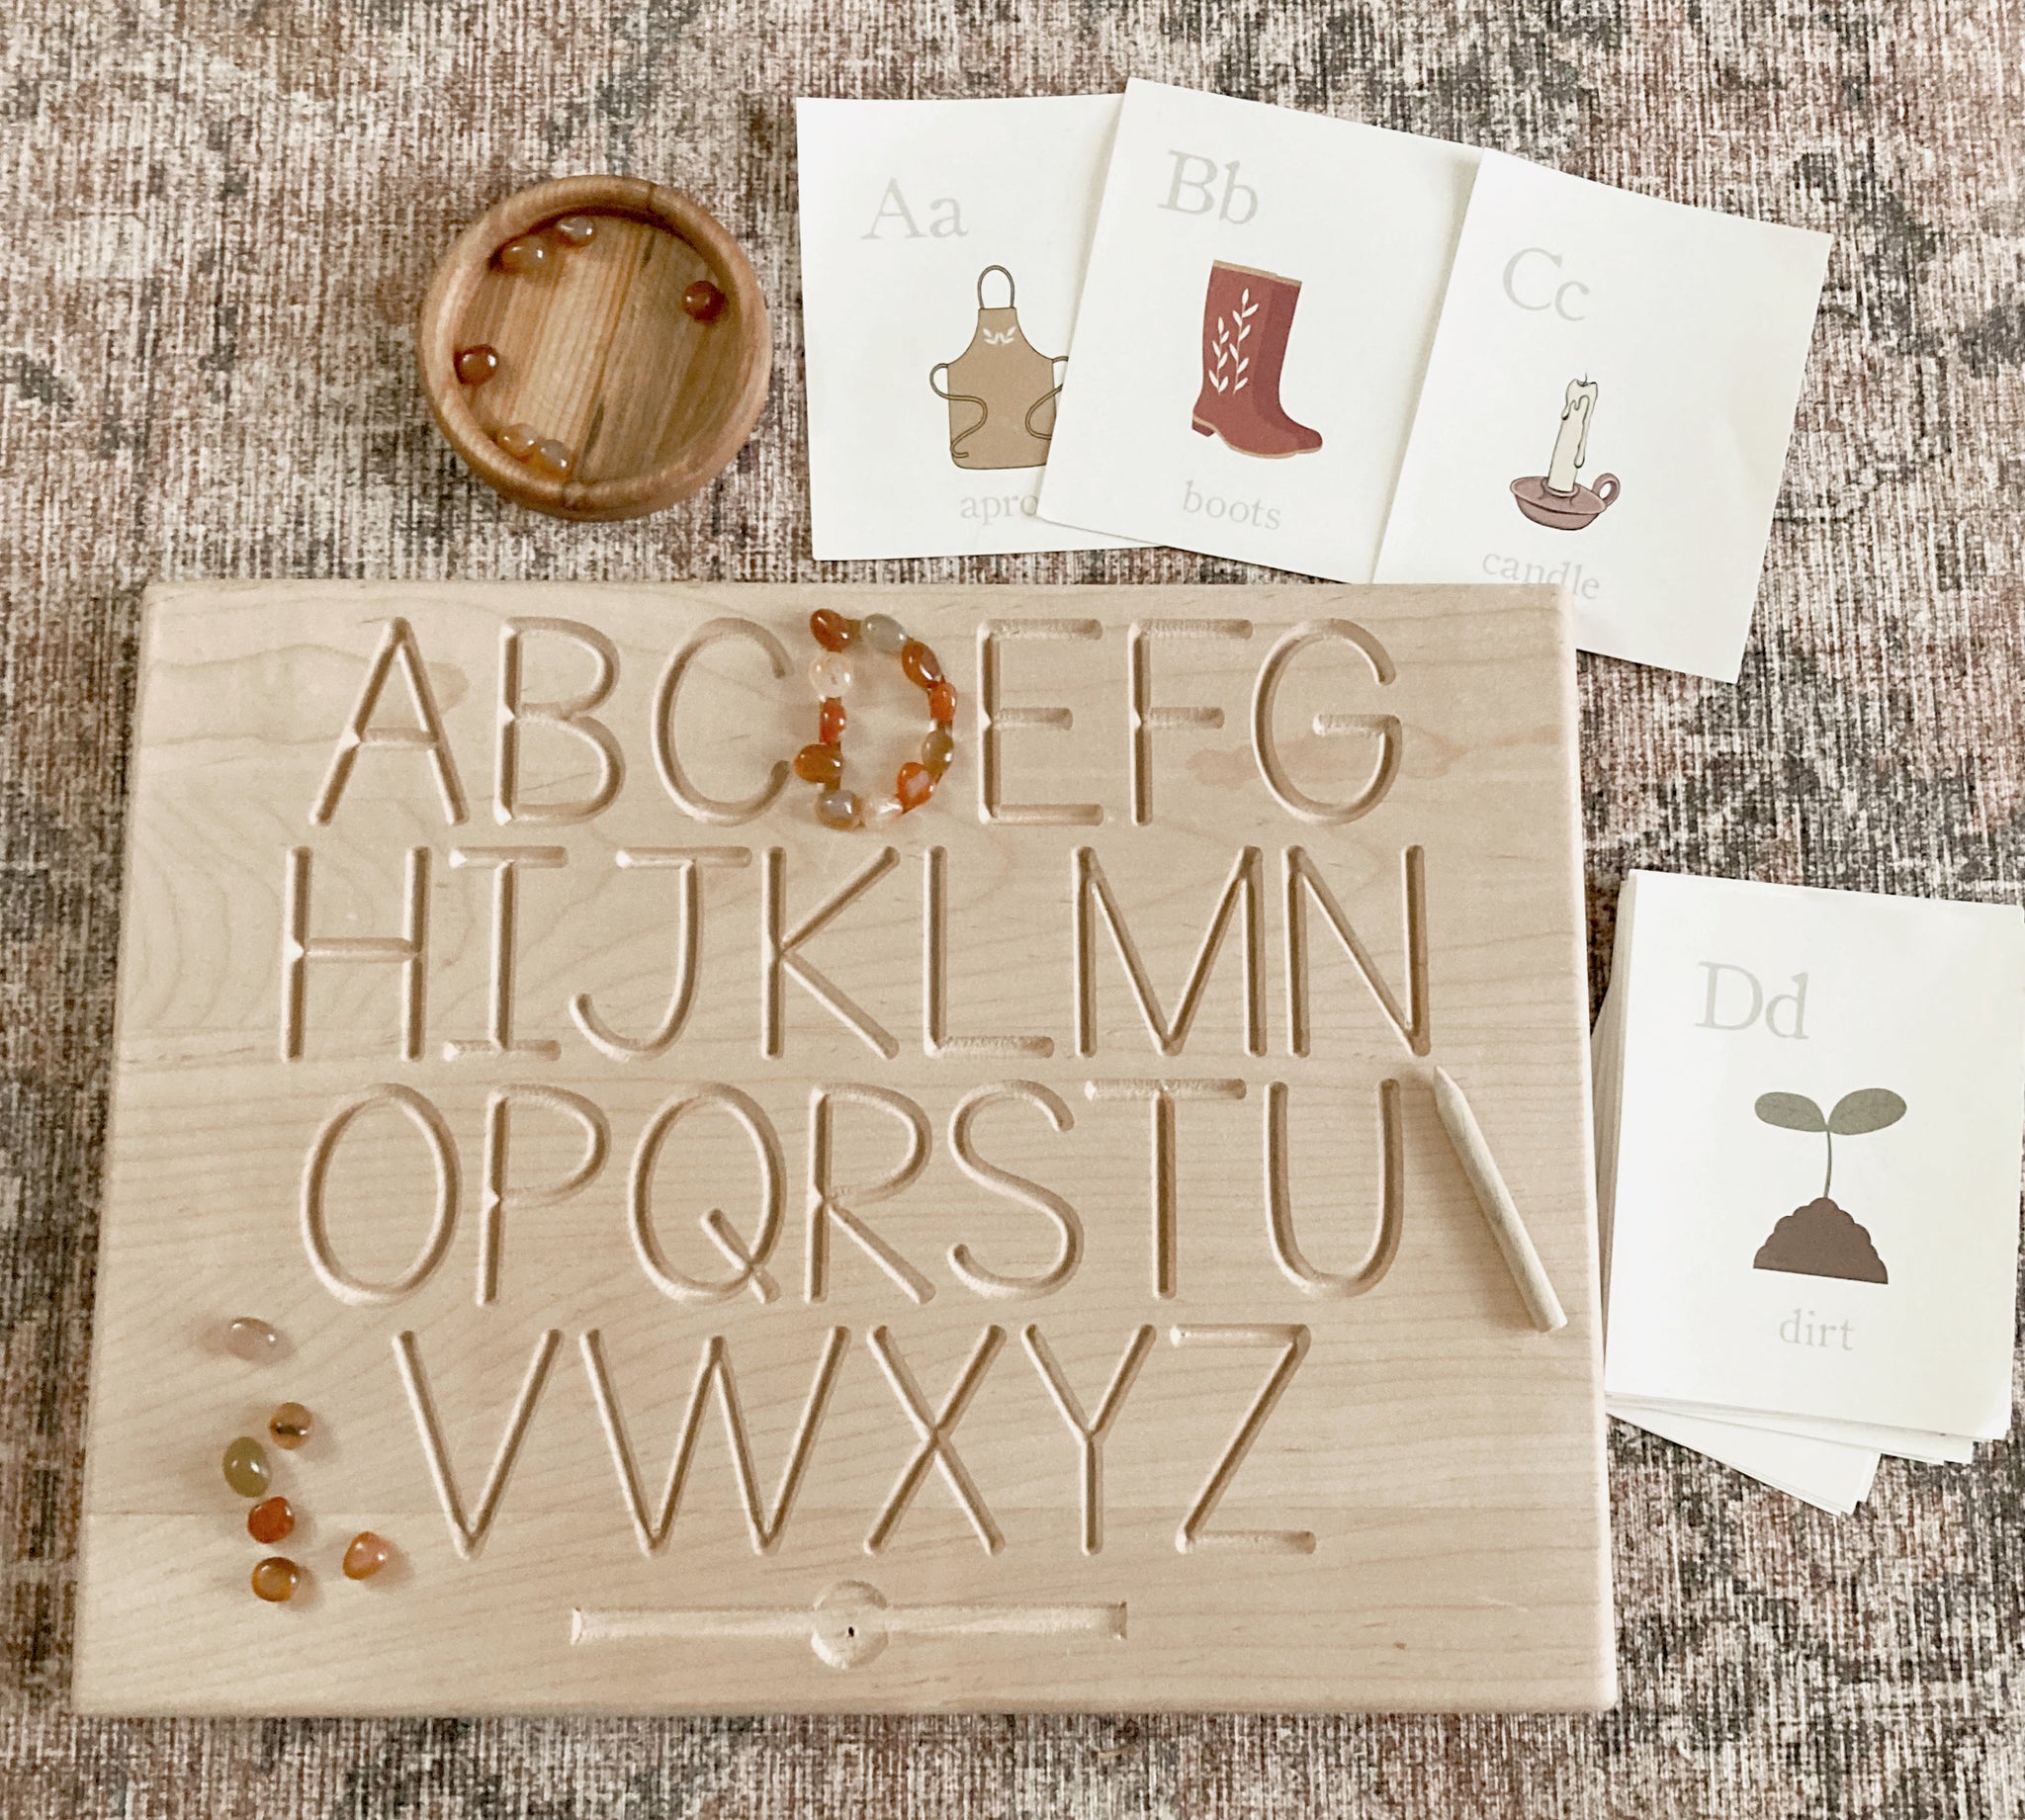 Wooden double sided alphabet tracing boards. Learning - Toddlers and  Preschool.